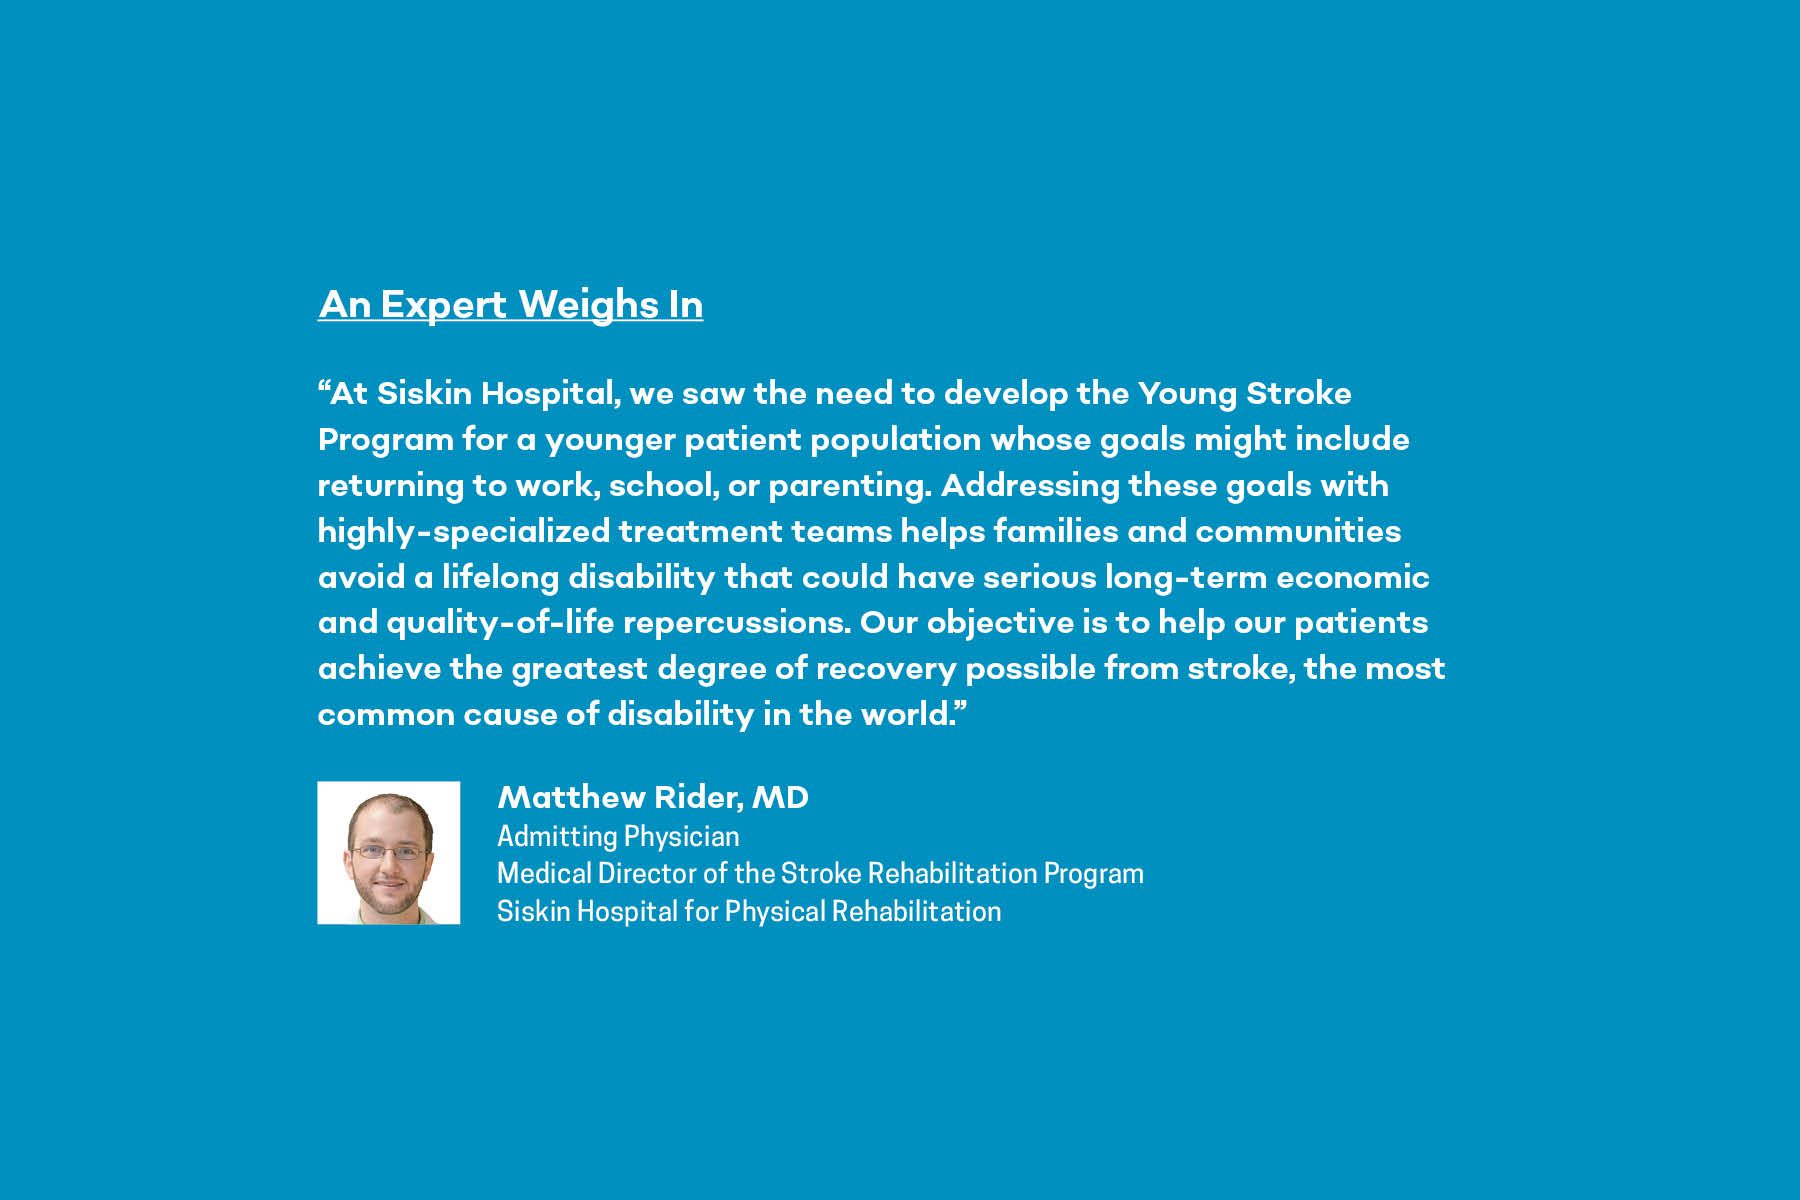 expert opinion on stroke care for younger adults from Matthew Rider, MD at Siskin